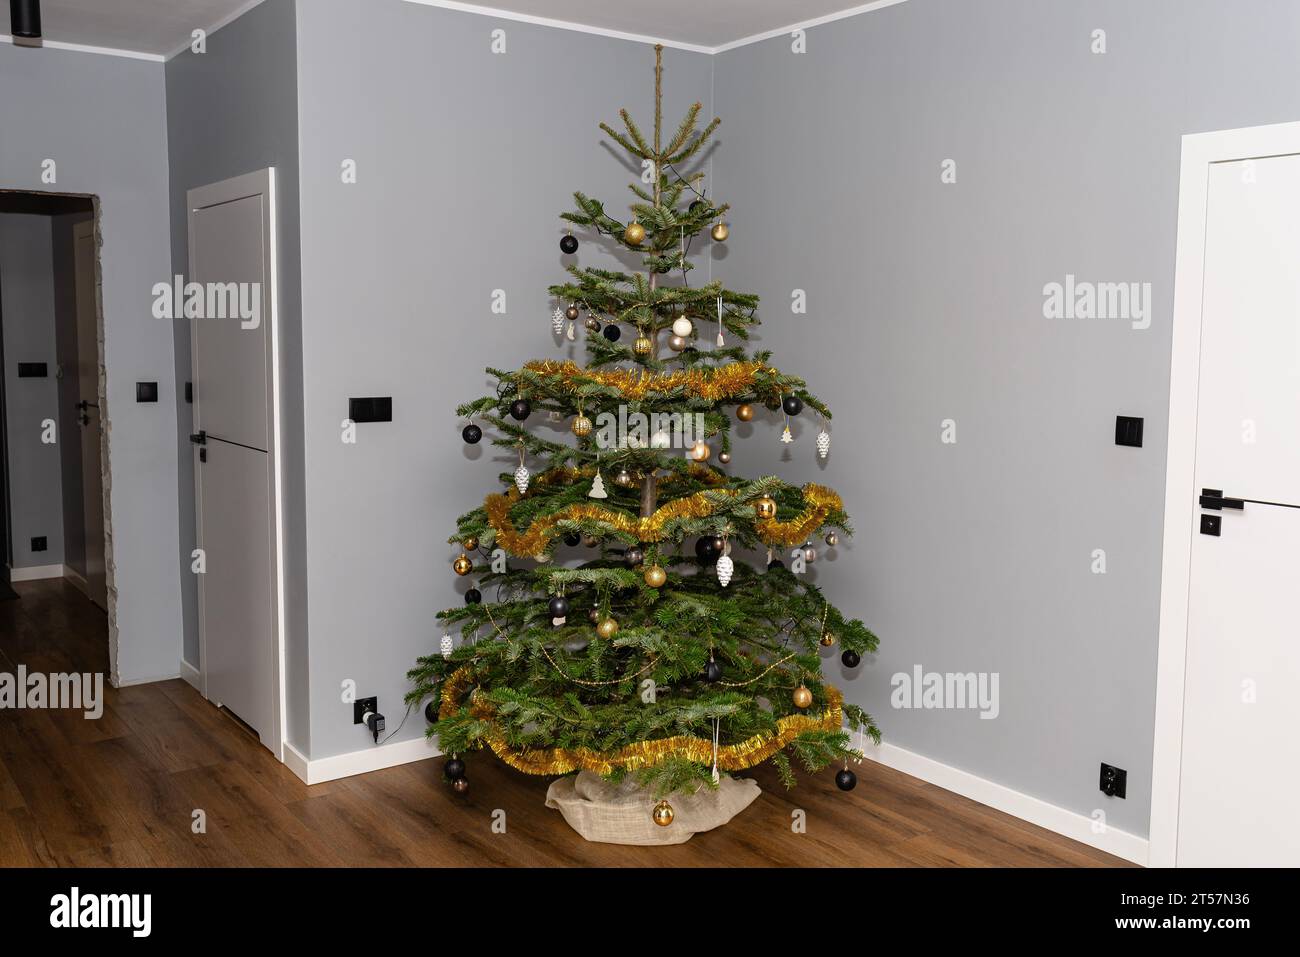 A Christmas tree made of Caucasian fir decorated with baubles stands in the hall of a modern house, in the corner of the living room. Stock Photo